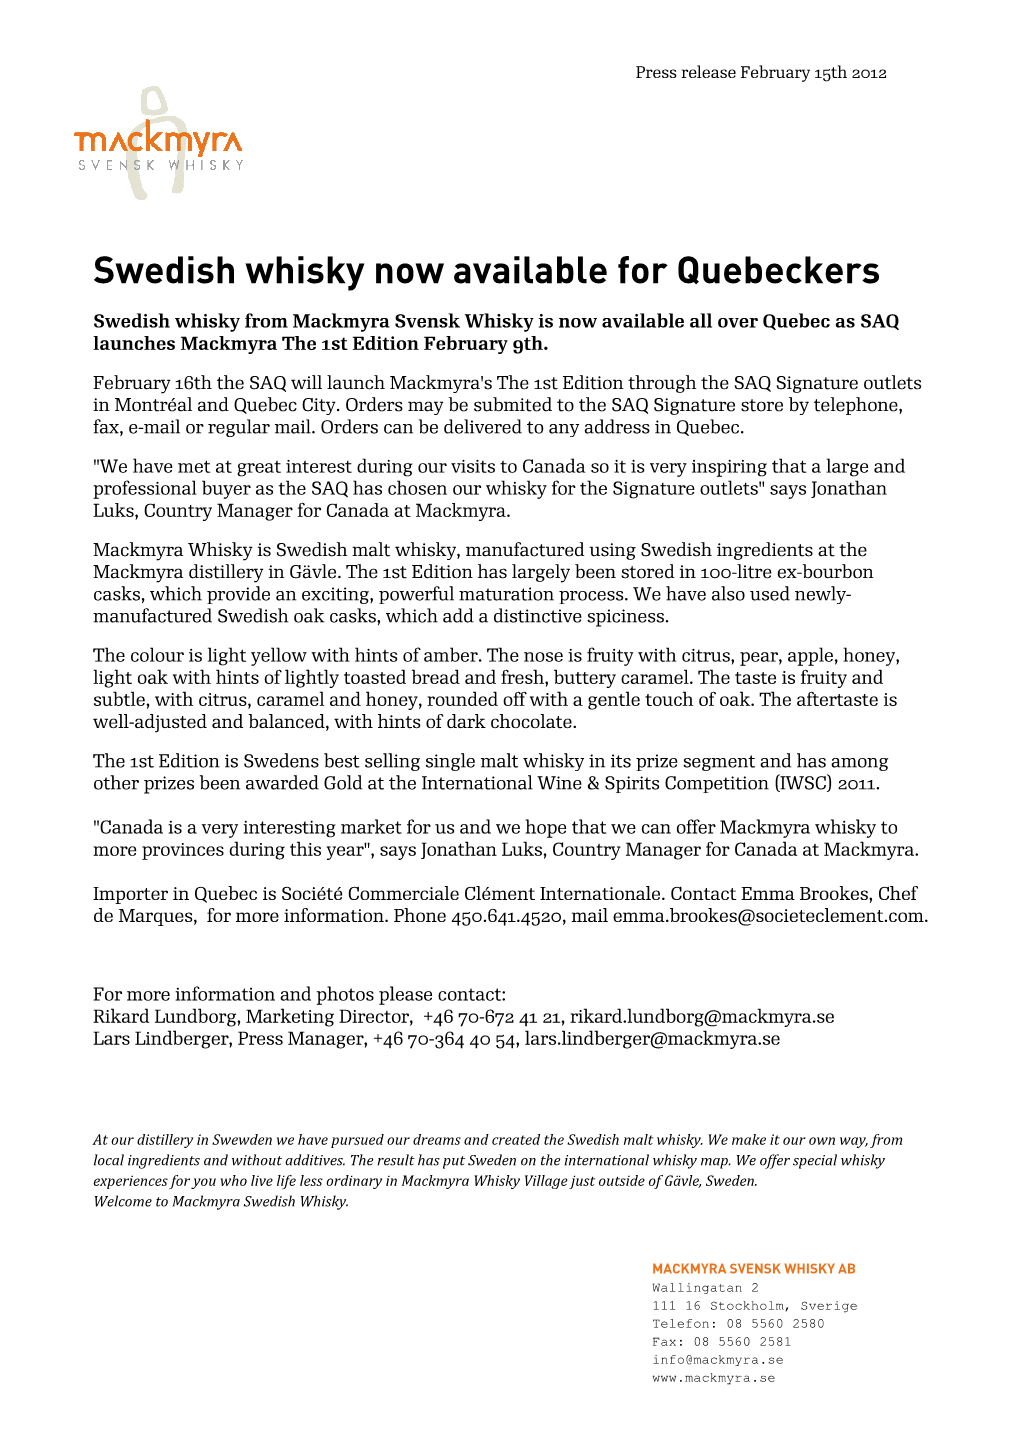 Swedish Whisky Now Available for Quebeckers